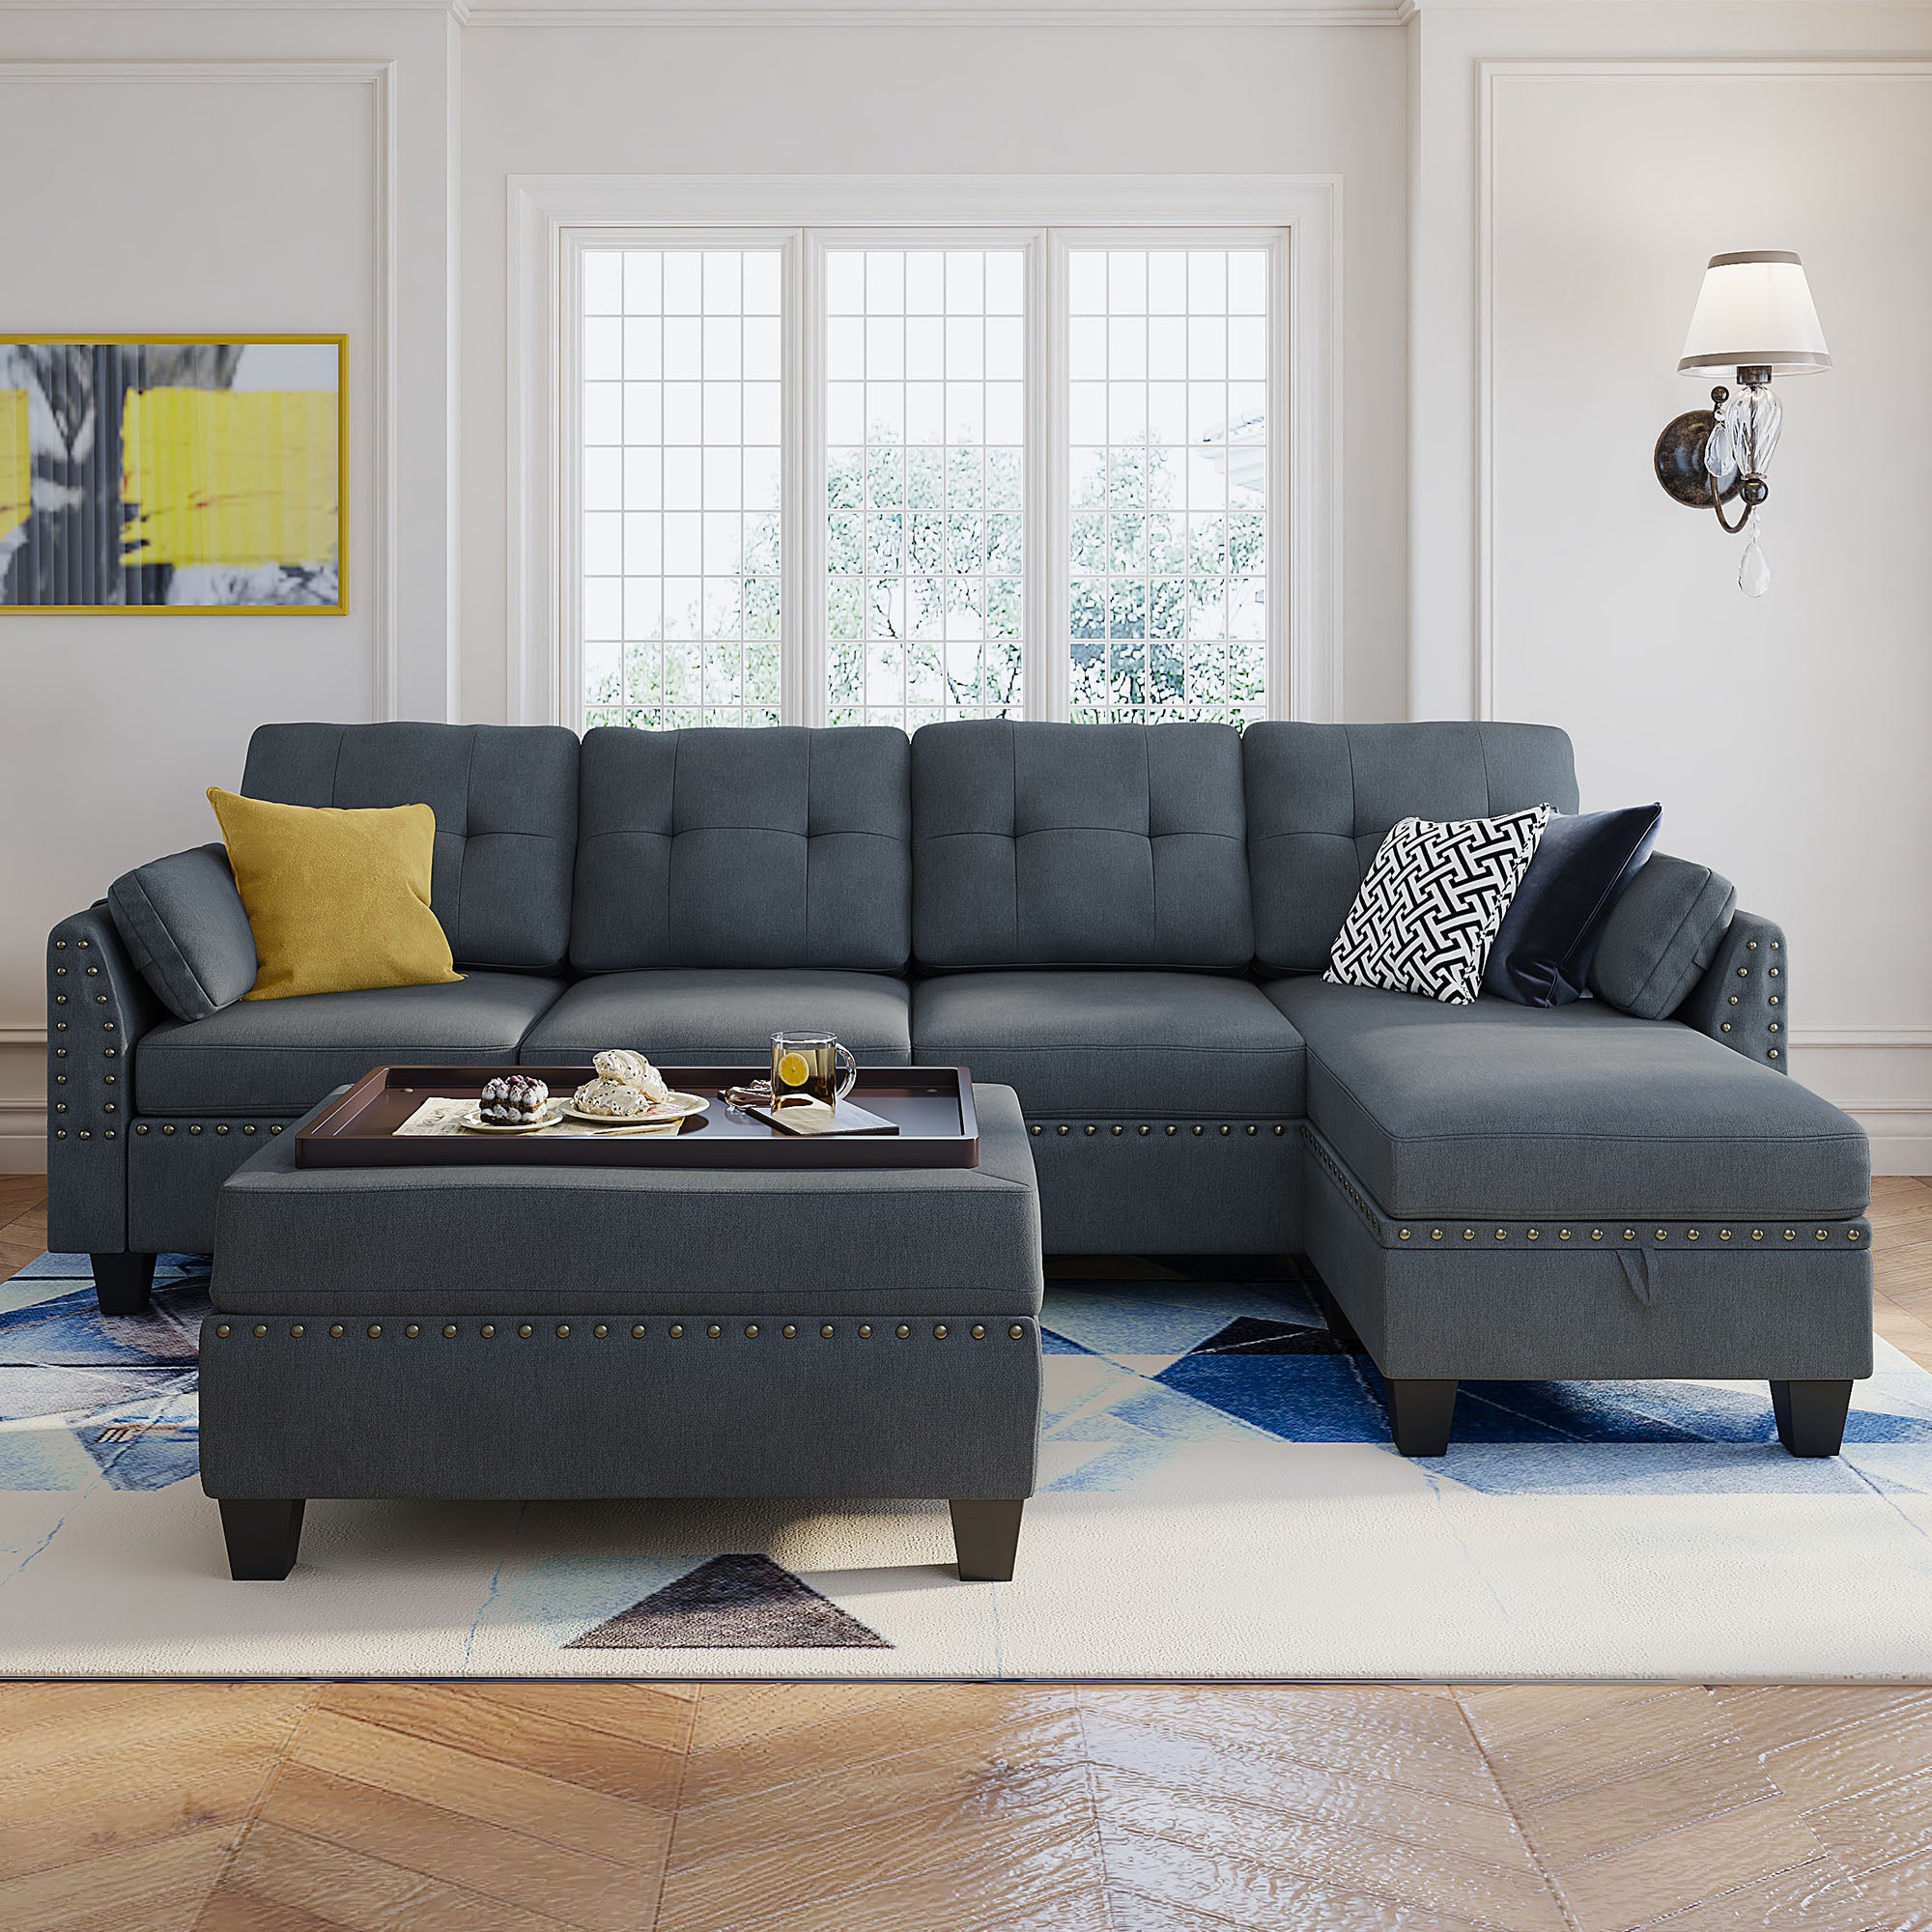 HONBAY 4-Seat L-Shaped Sectional Sofa with Storage Ottoman Set